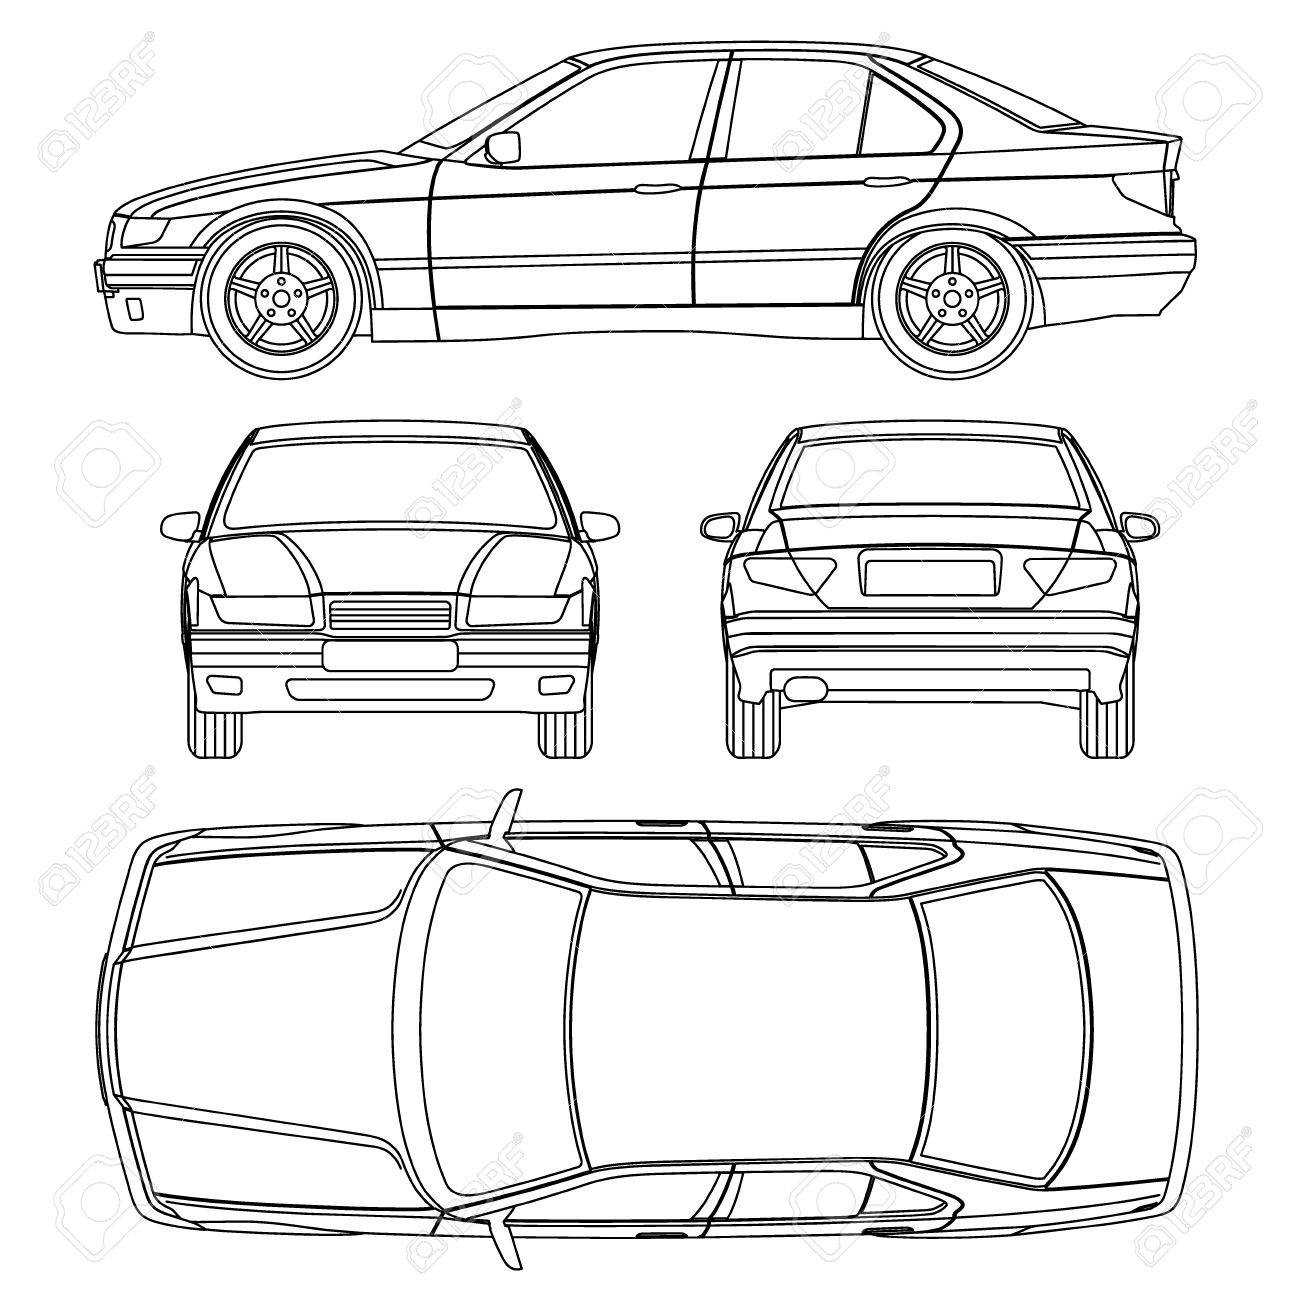 Car Line Draw Insurance Damage, Condition Report Form Intended For Car Damage Report Template